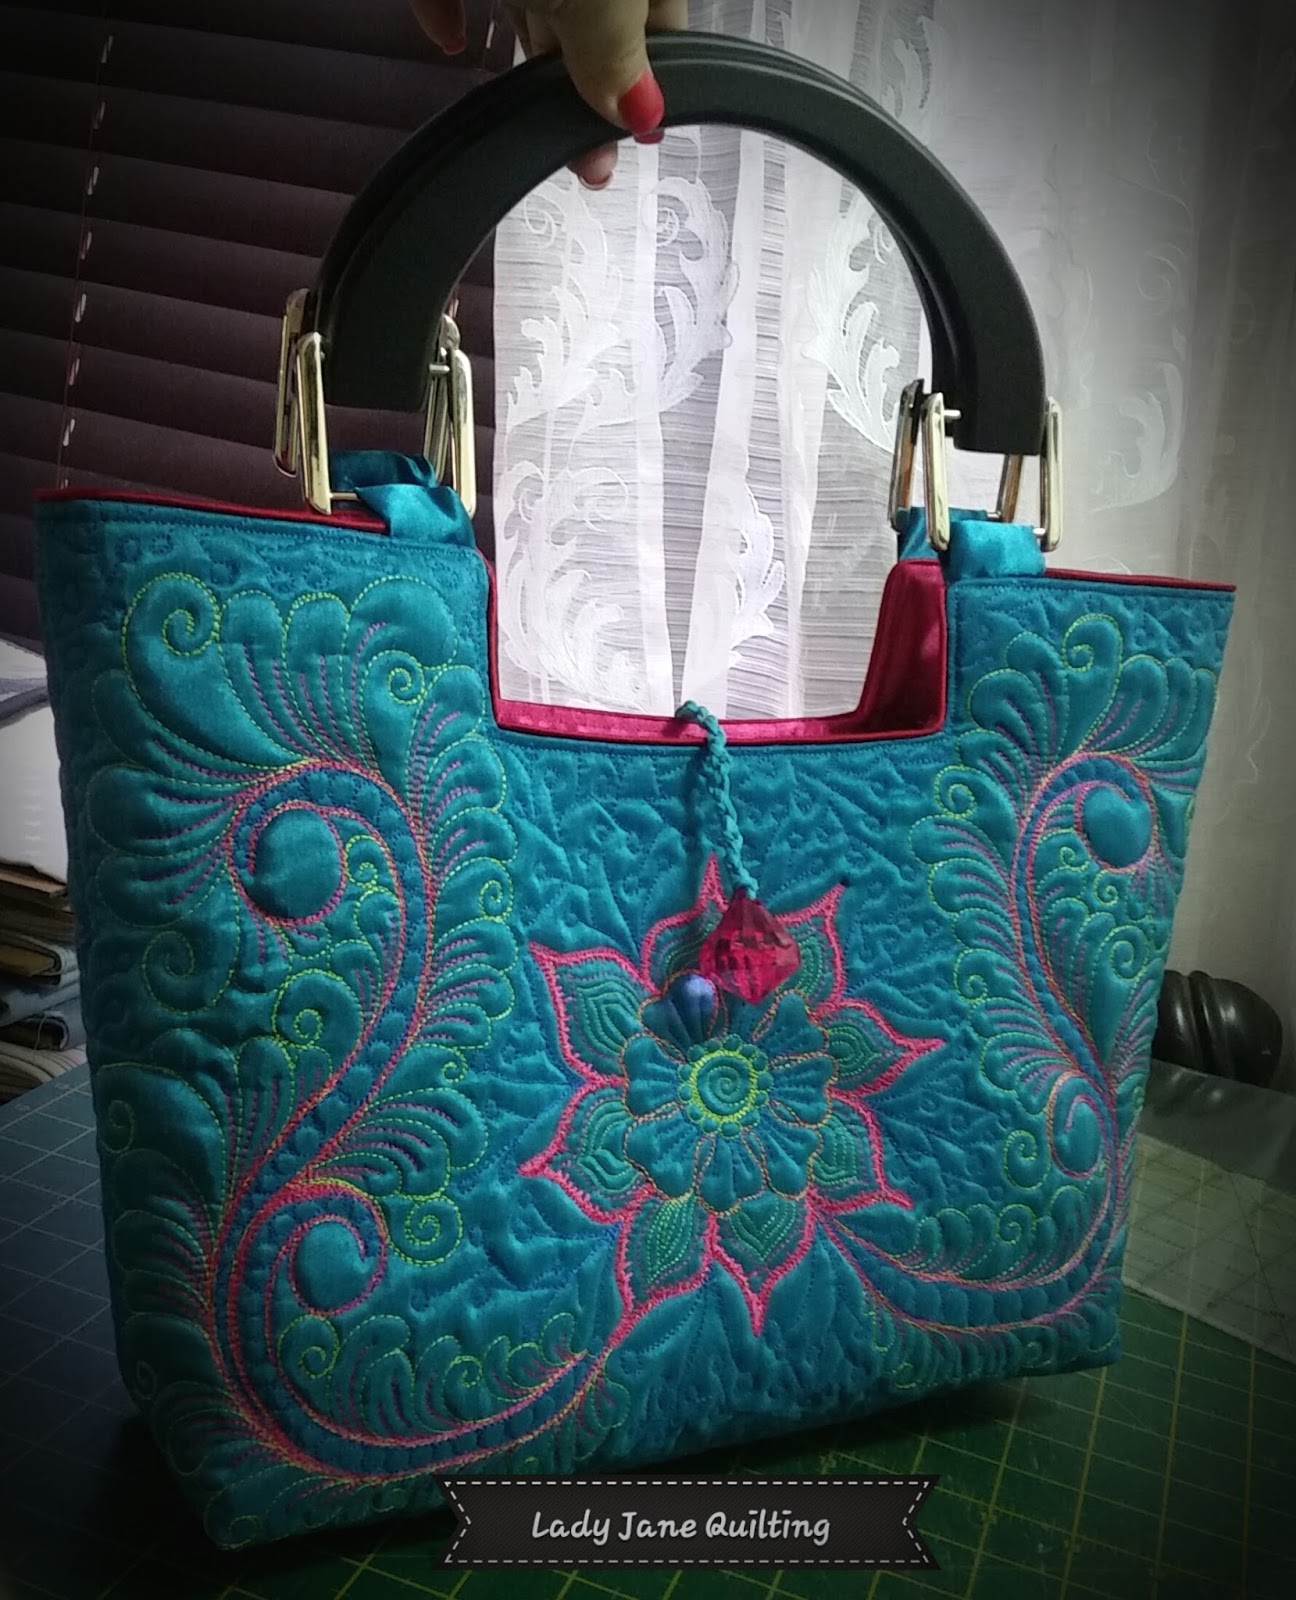 Lady Jane Quilting: Latest Quilted Bags